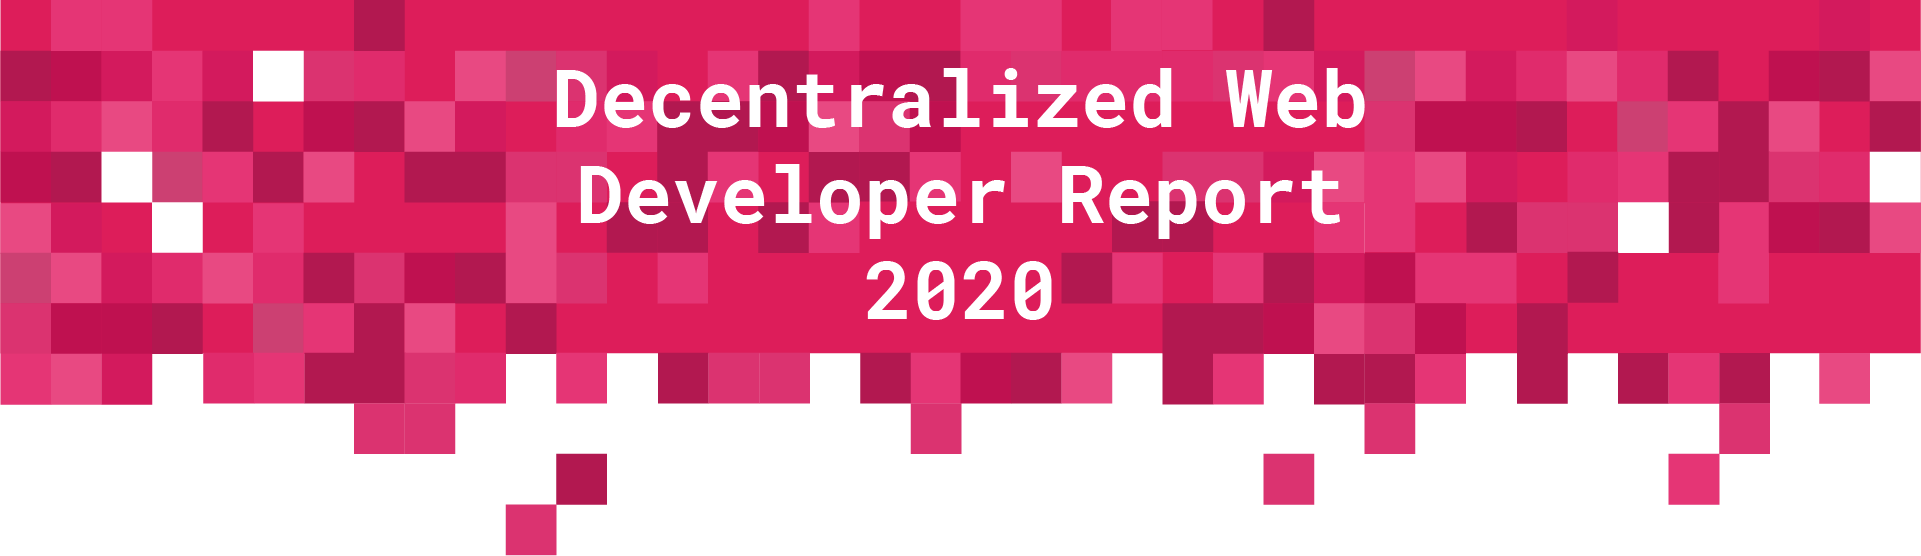 featured image - Key Developer Insights To The State Of The Decentralized Web (DWeb)